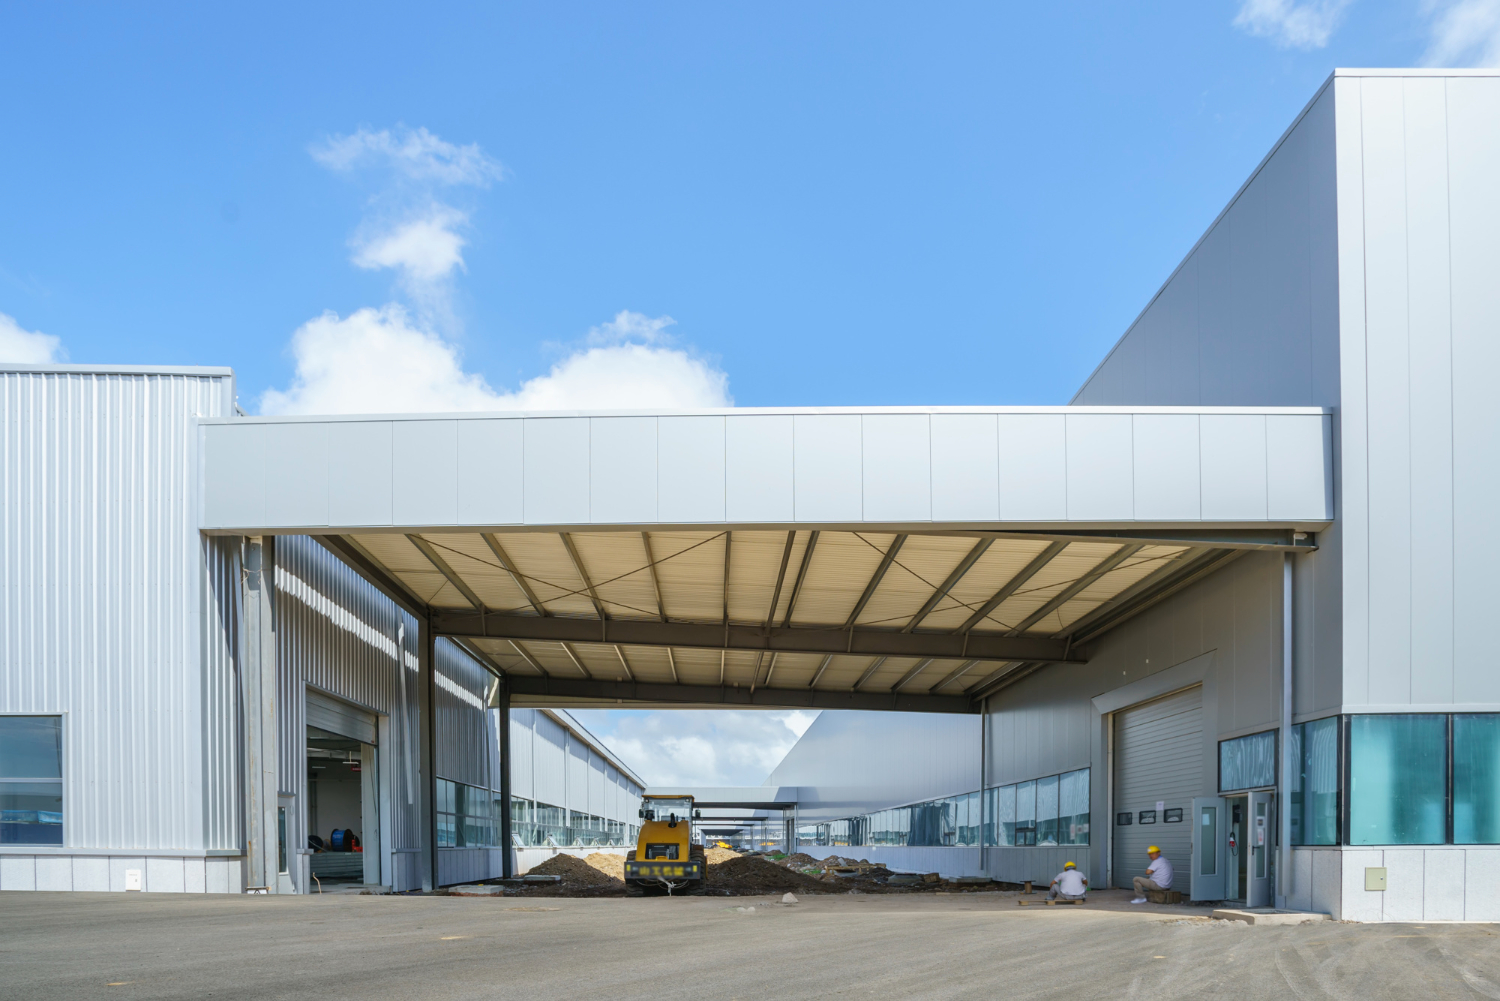 Single Vs Double Carports: Finding the Right One for Best Storage Facilities